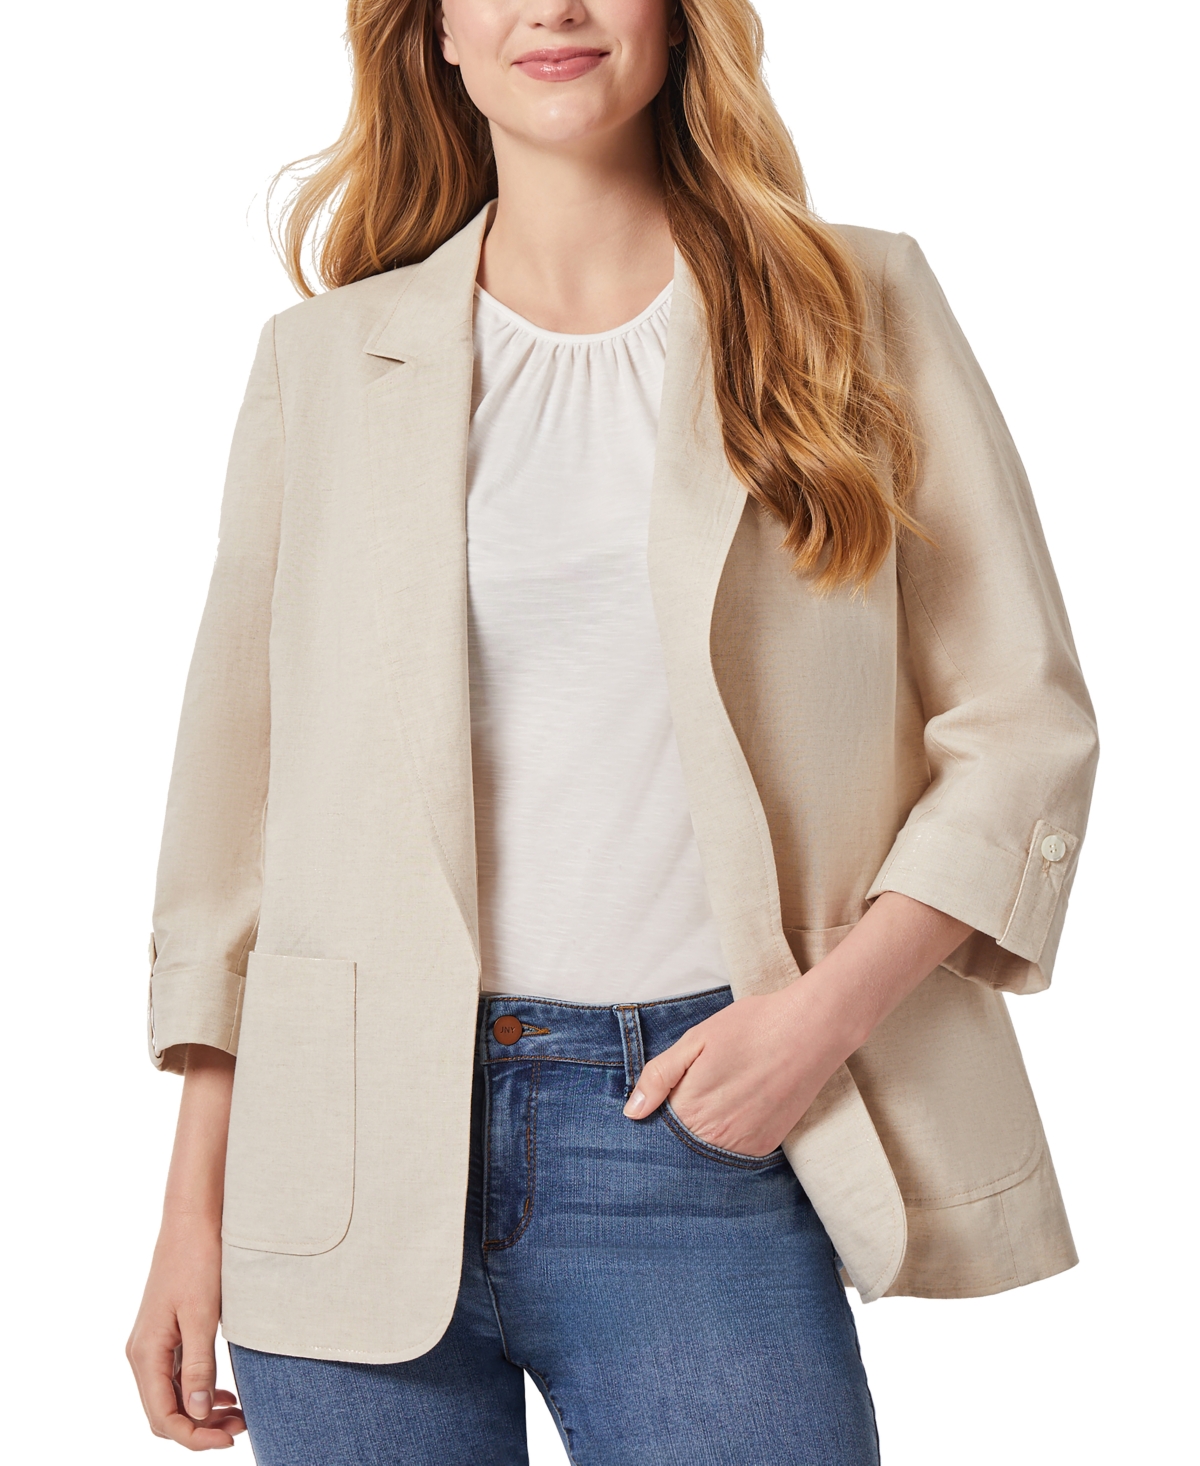 Women's Notched-Collar Rolled-Sleeve Jacket - Natural